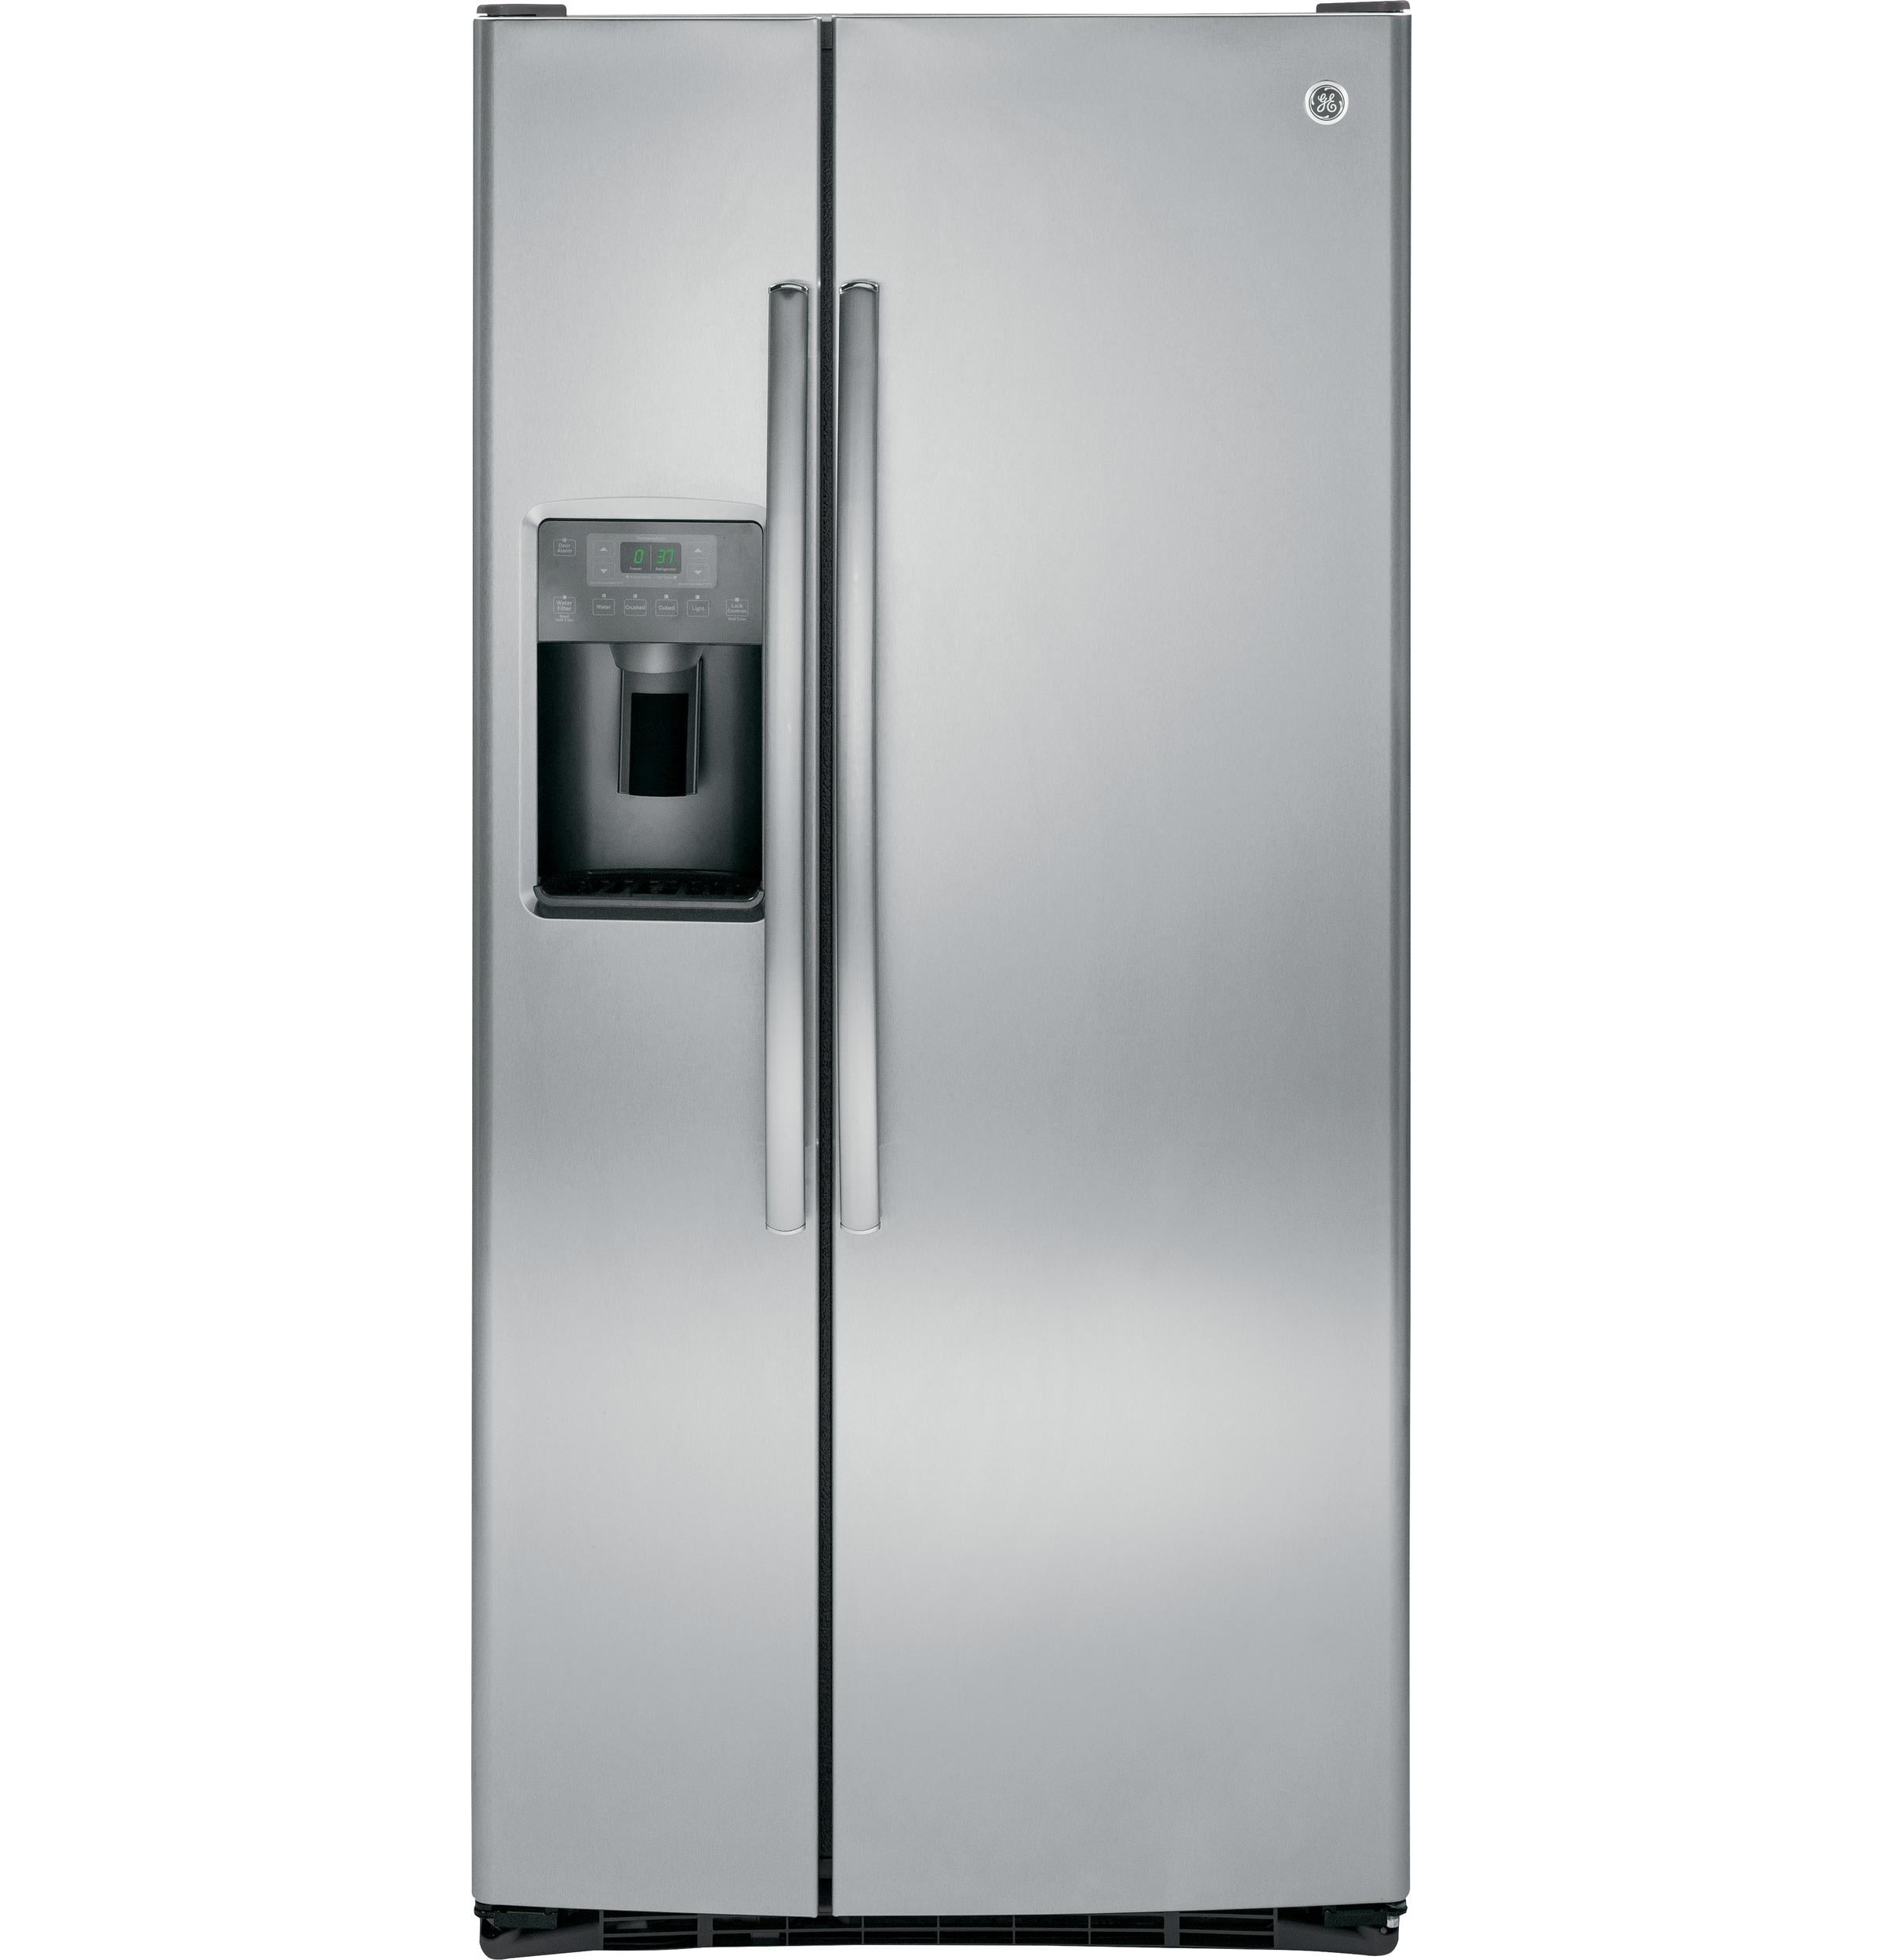 GE Appliances GSS23GSKSS 33 Inch Freestanding Side by Side Refrigerator 33 Inch Refrigerator Stainless Steel